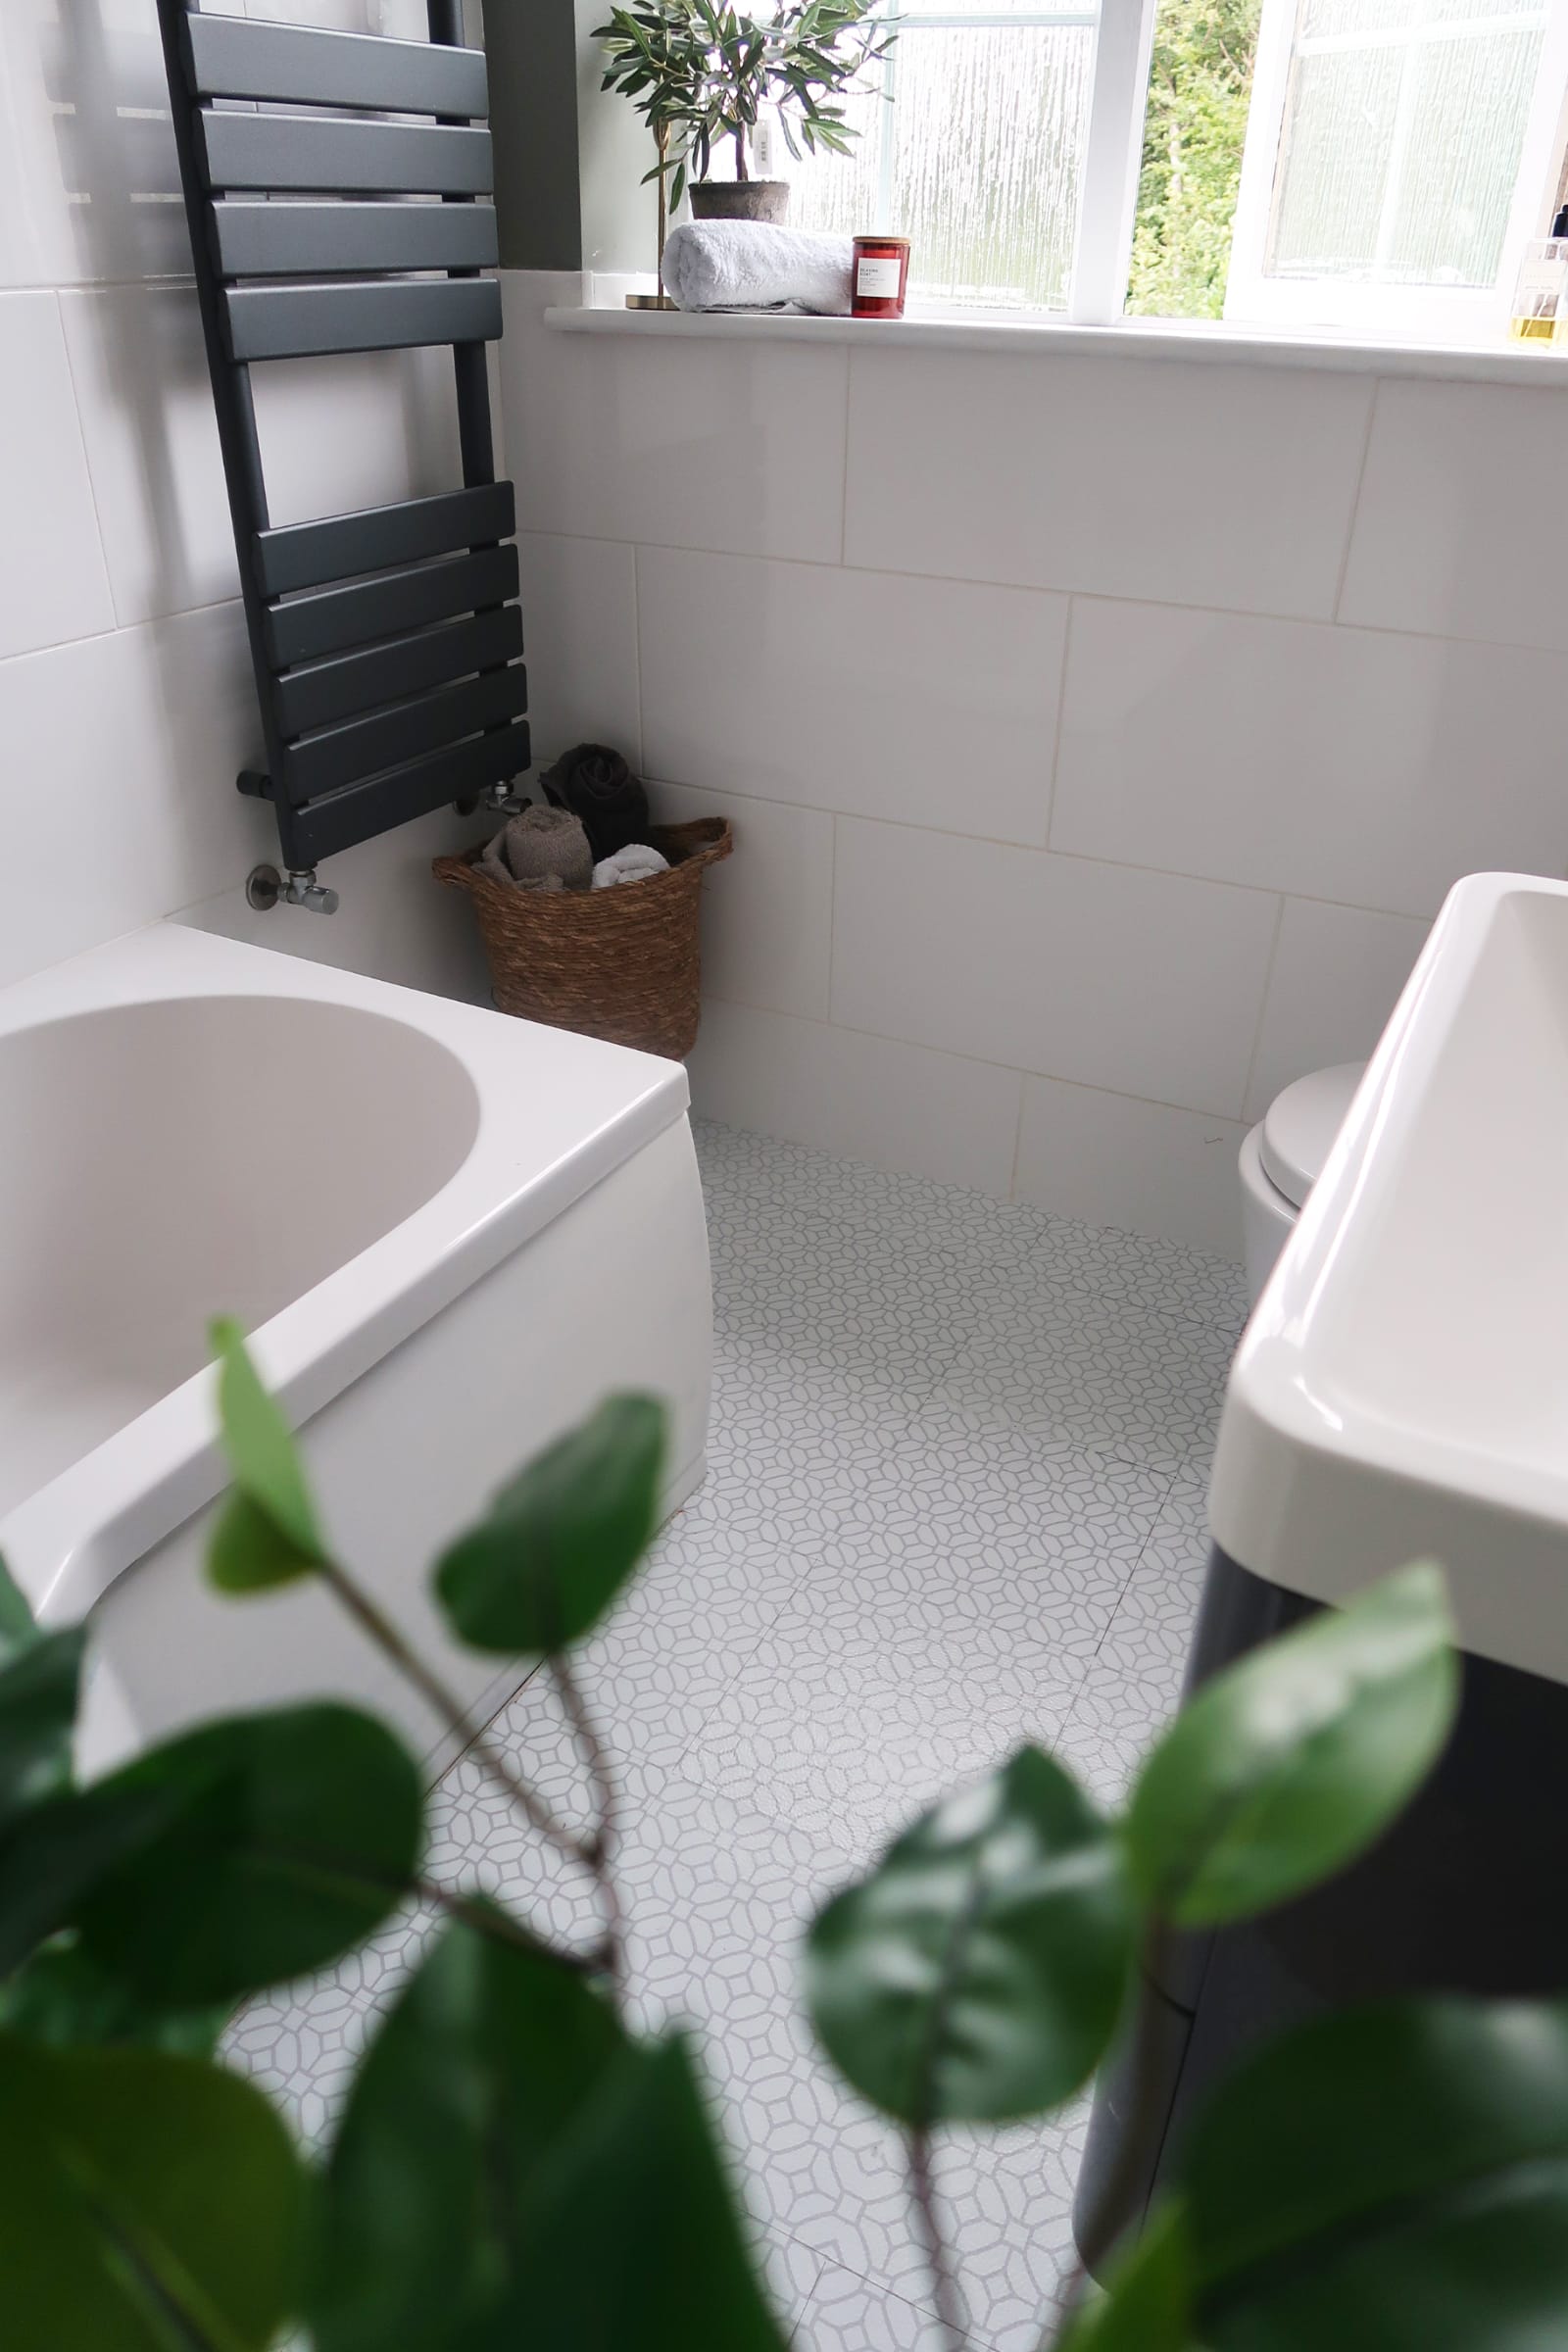 How to use stick-on floor tiles for a budget bathroom makeover